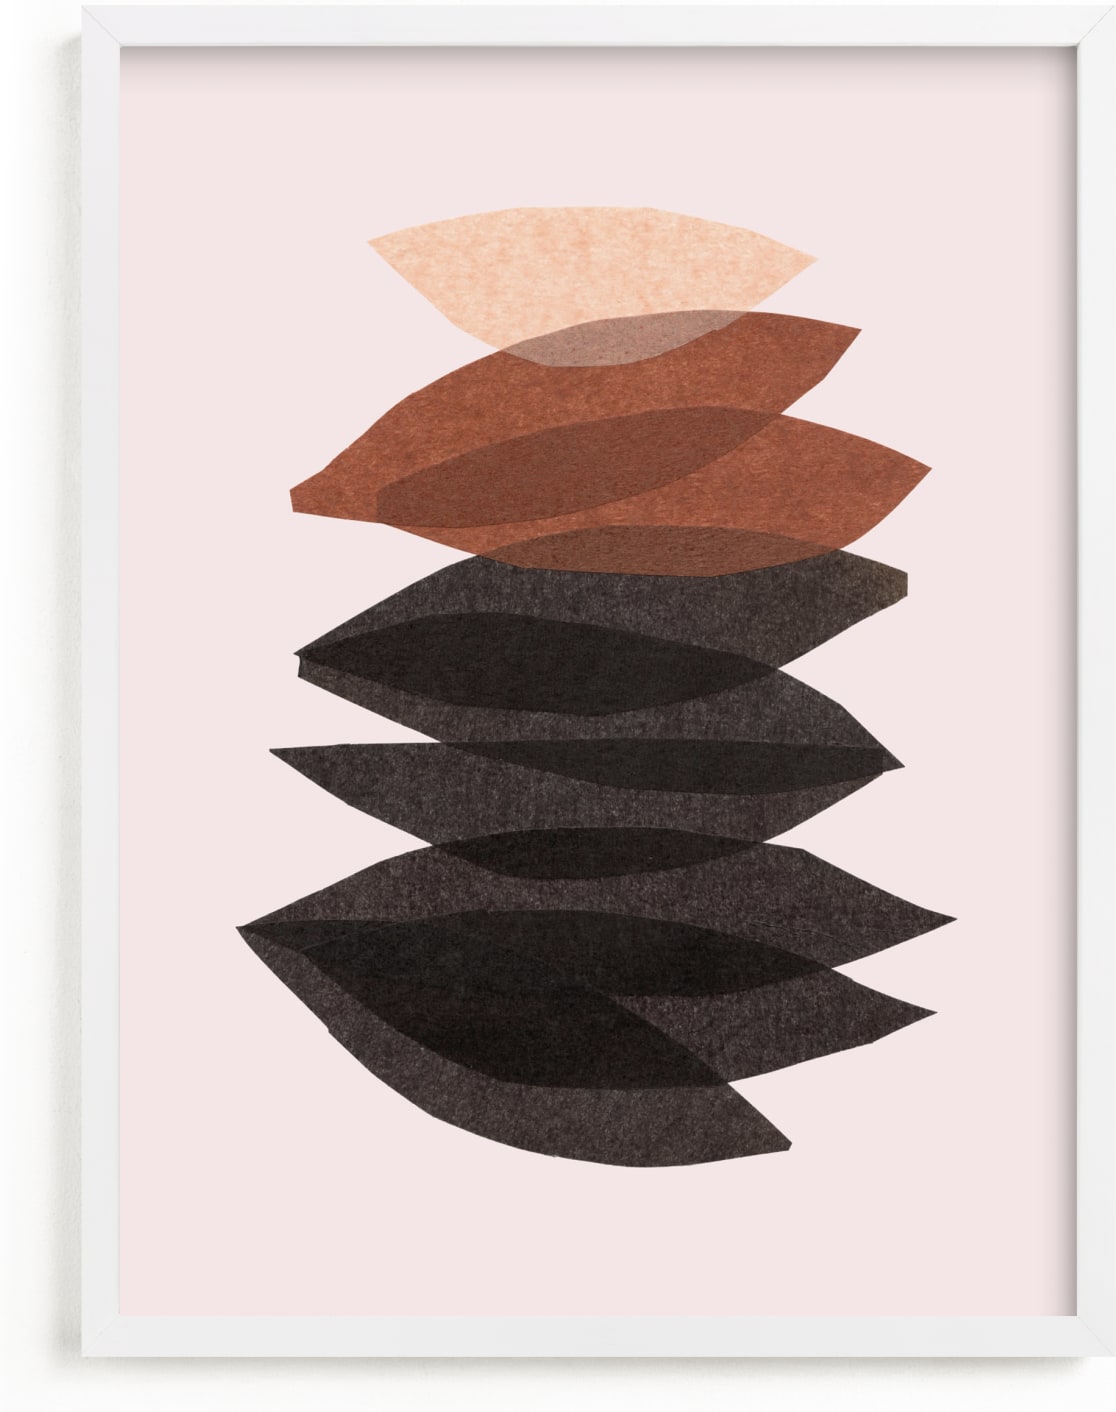 This is a brown art by Carrie Moradi called organic stack.